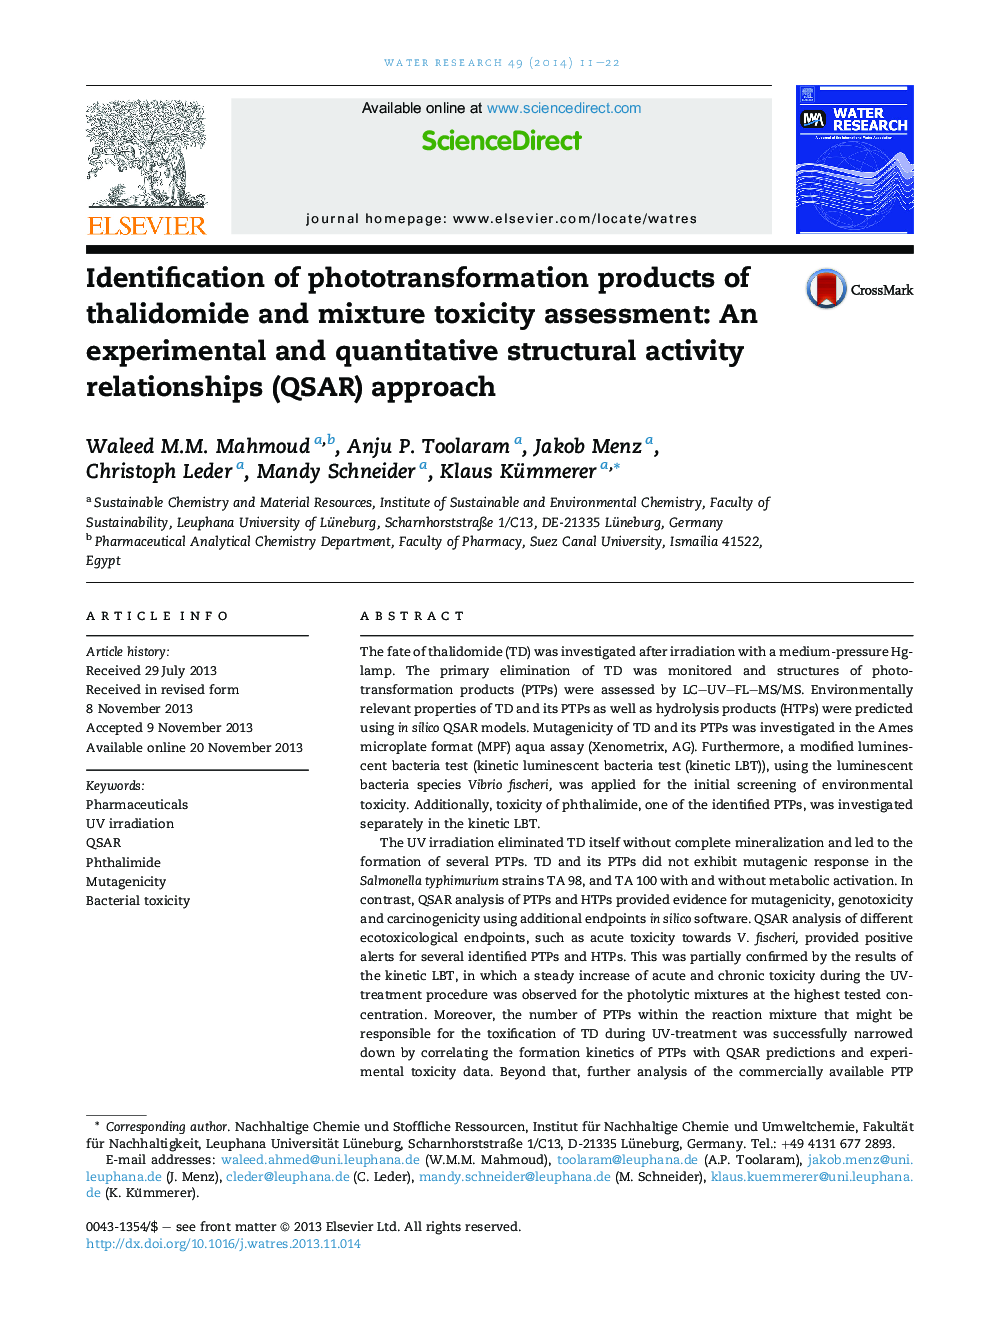 Identification of phototransformation products of thalidomide and mixture toxicity assessment: An experimental and quantitative structural activity relationships (QSAR) approach